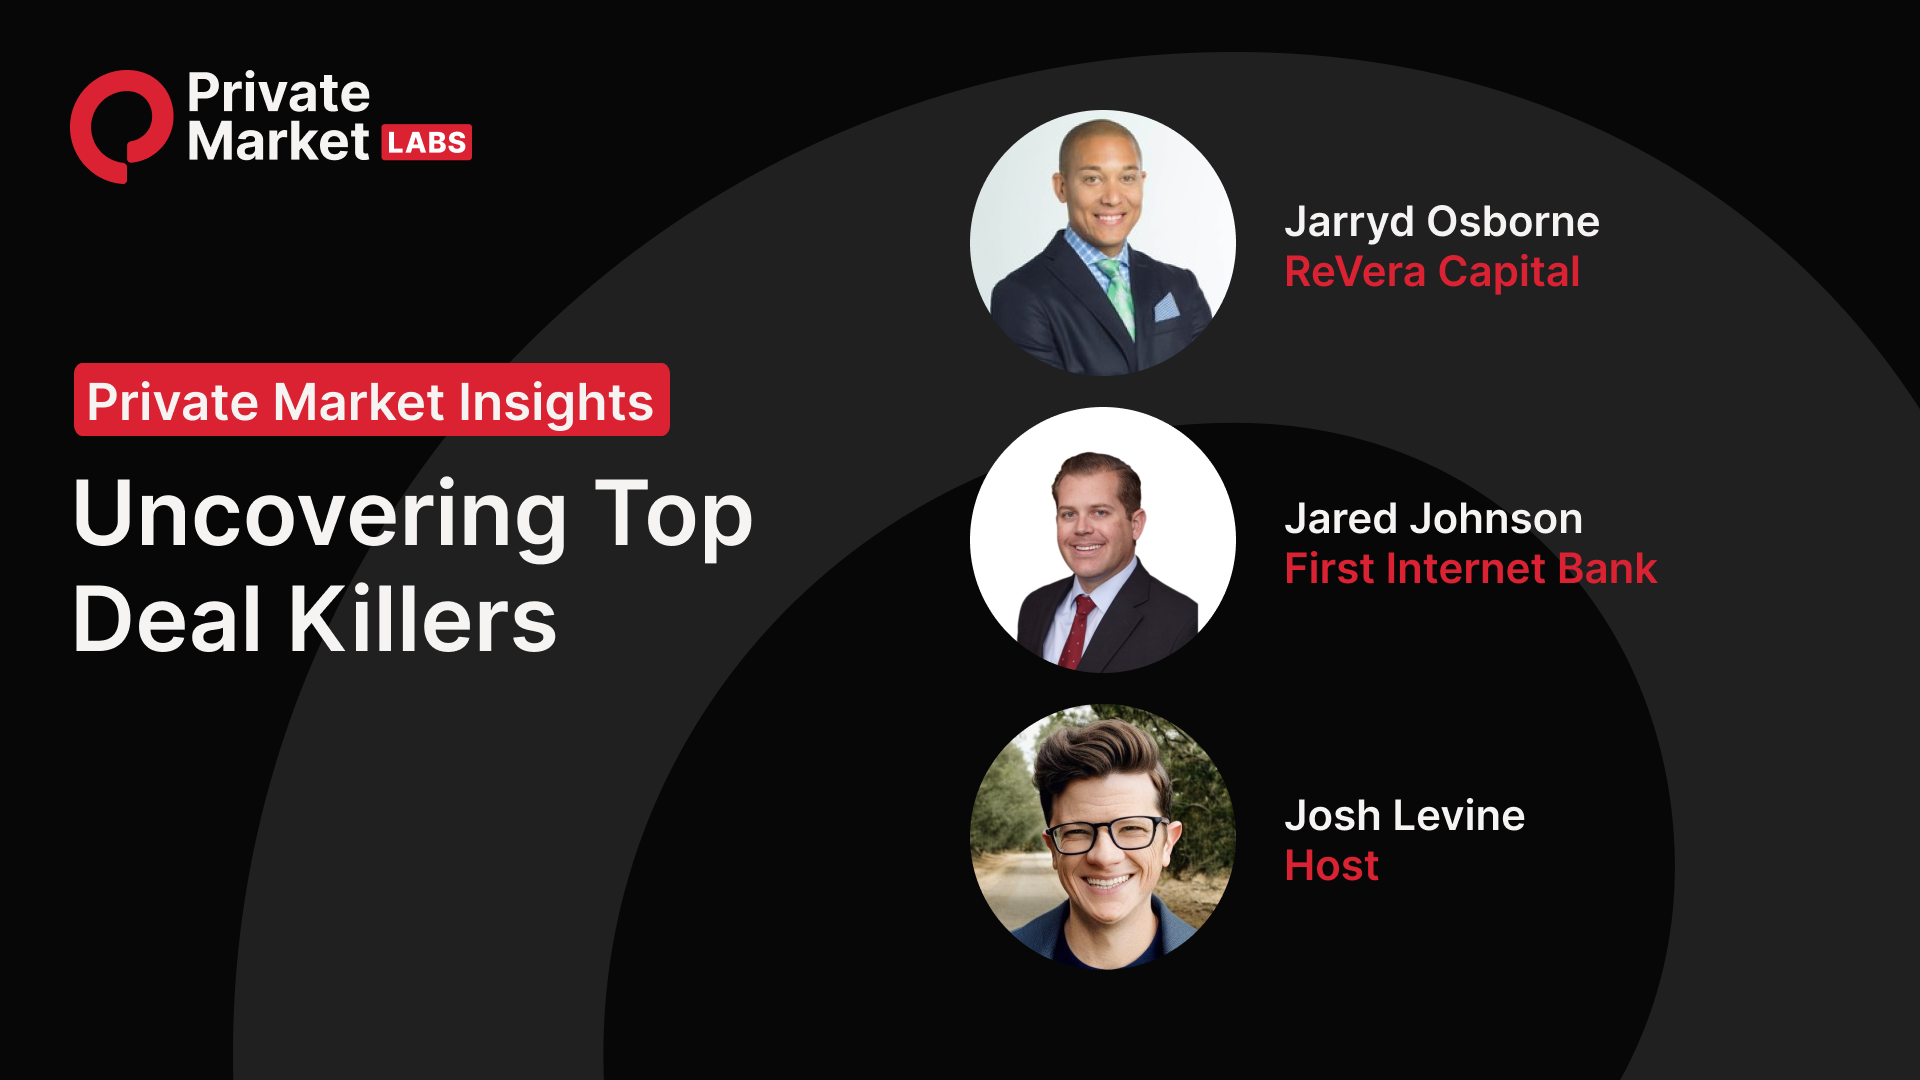 Uncovering Top 6 Deal Killers in M&A Transactions with Jared Johnson and Jarryd Osborne